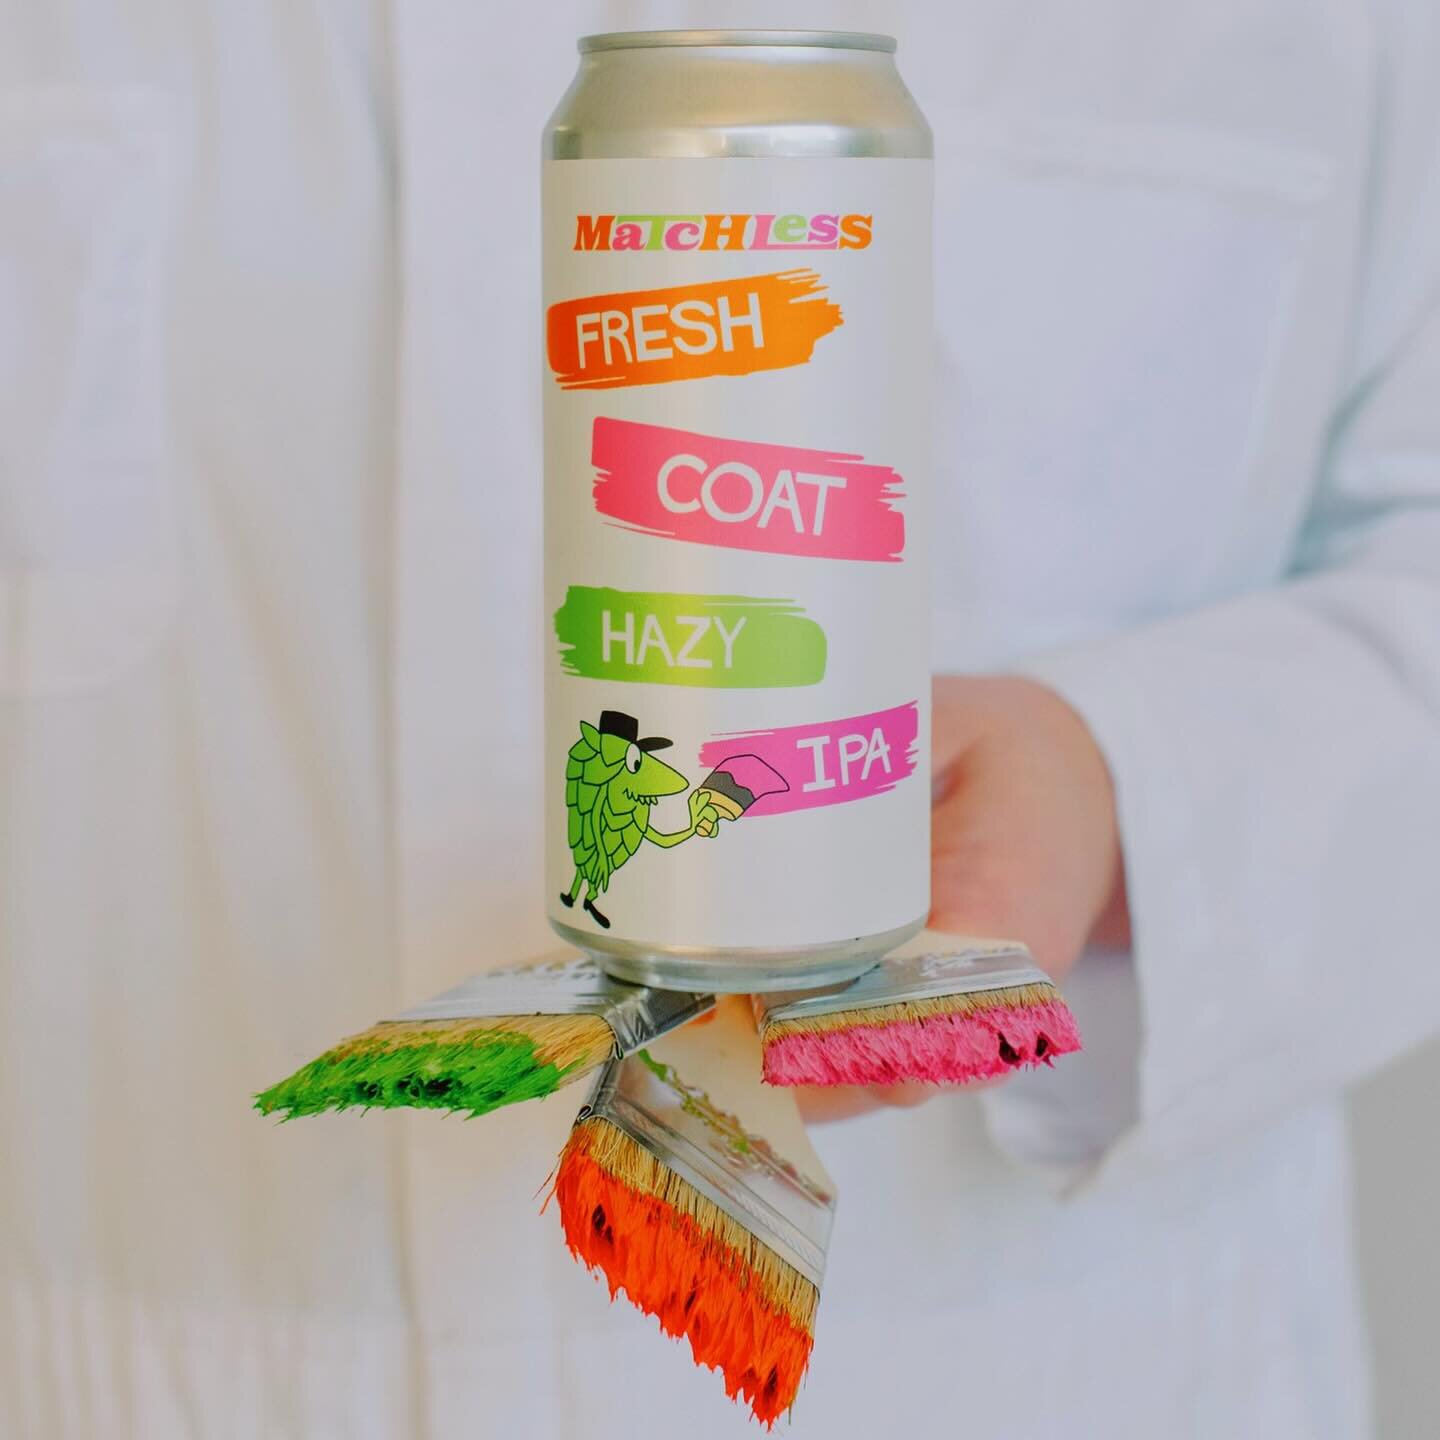 🩷🟩🔶Fresh Coat🔶🟩🩷

Does your fridge look drab? In need of a fresh coat of paint? Let&rsquo;s spruce things up with this Hazy IPA featuring Citra, Vic Secret, Chinook &amp; Ariana hops. Pilsner, Munich &amp; Honey malts with Flaked Wheat make a n